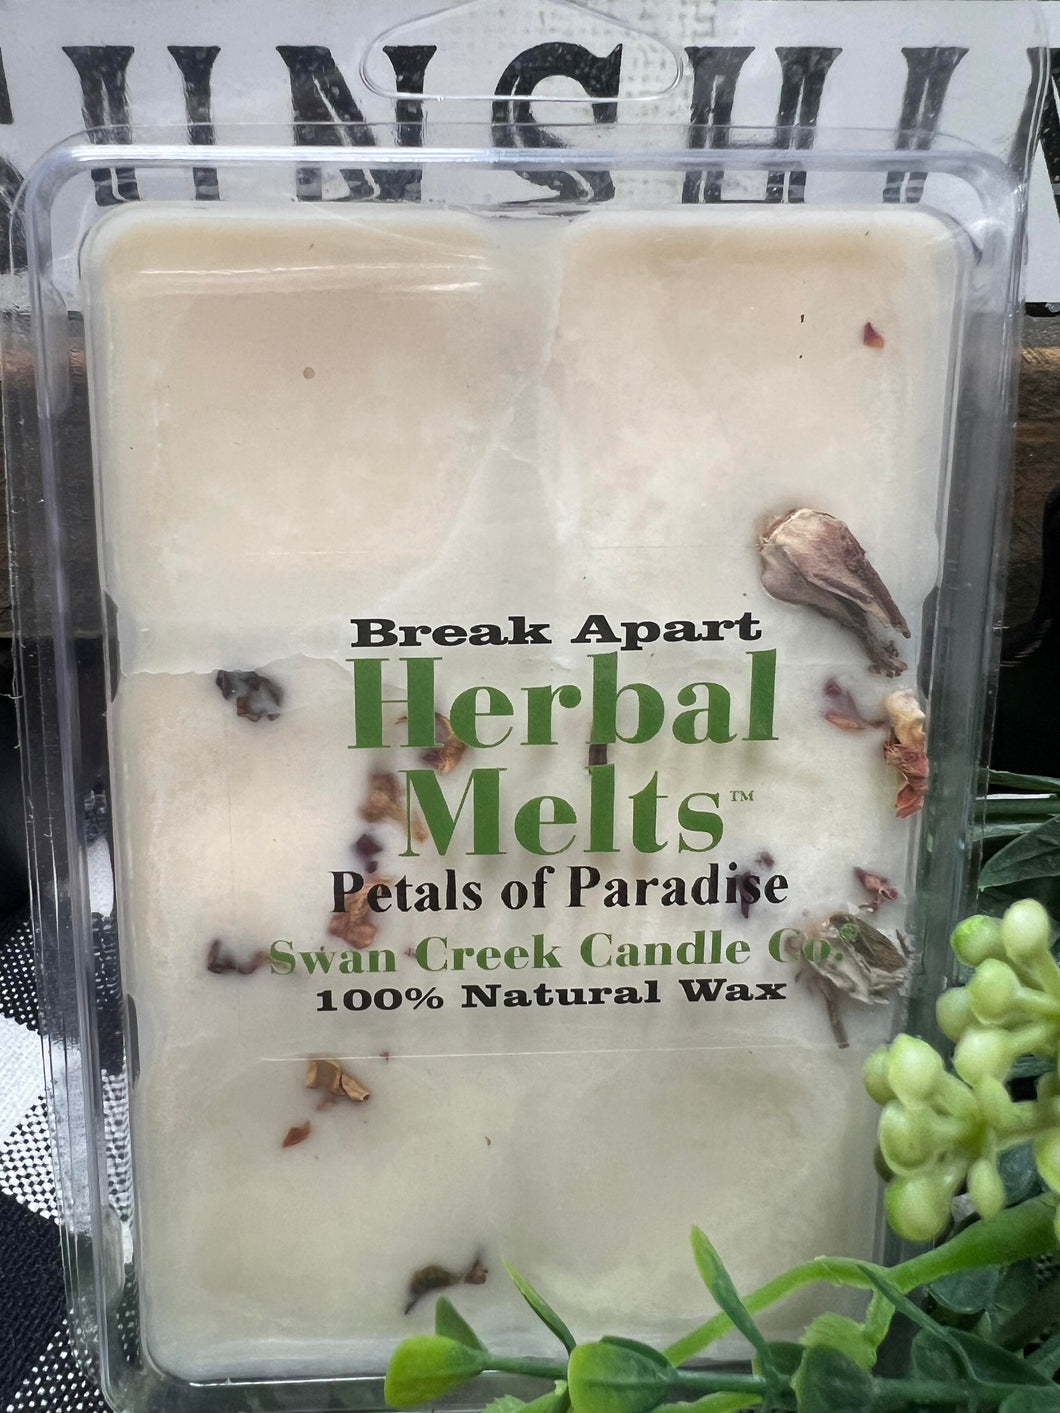 Swan Creek Candle Co. Petals of Paradise Herbal Melts